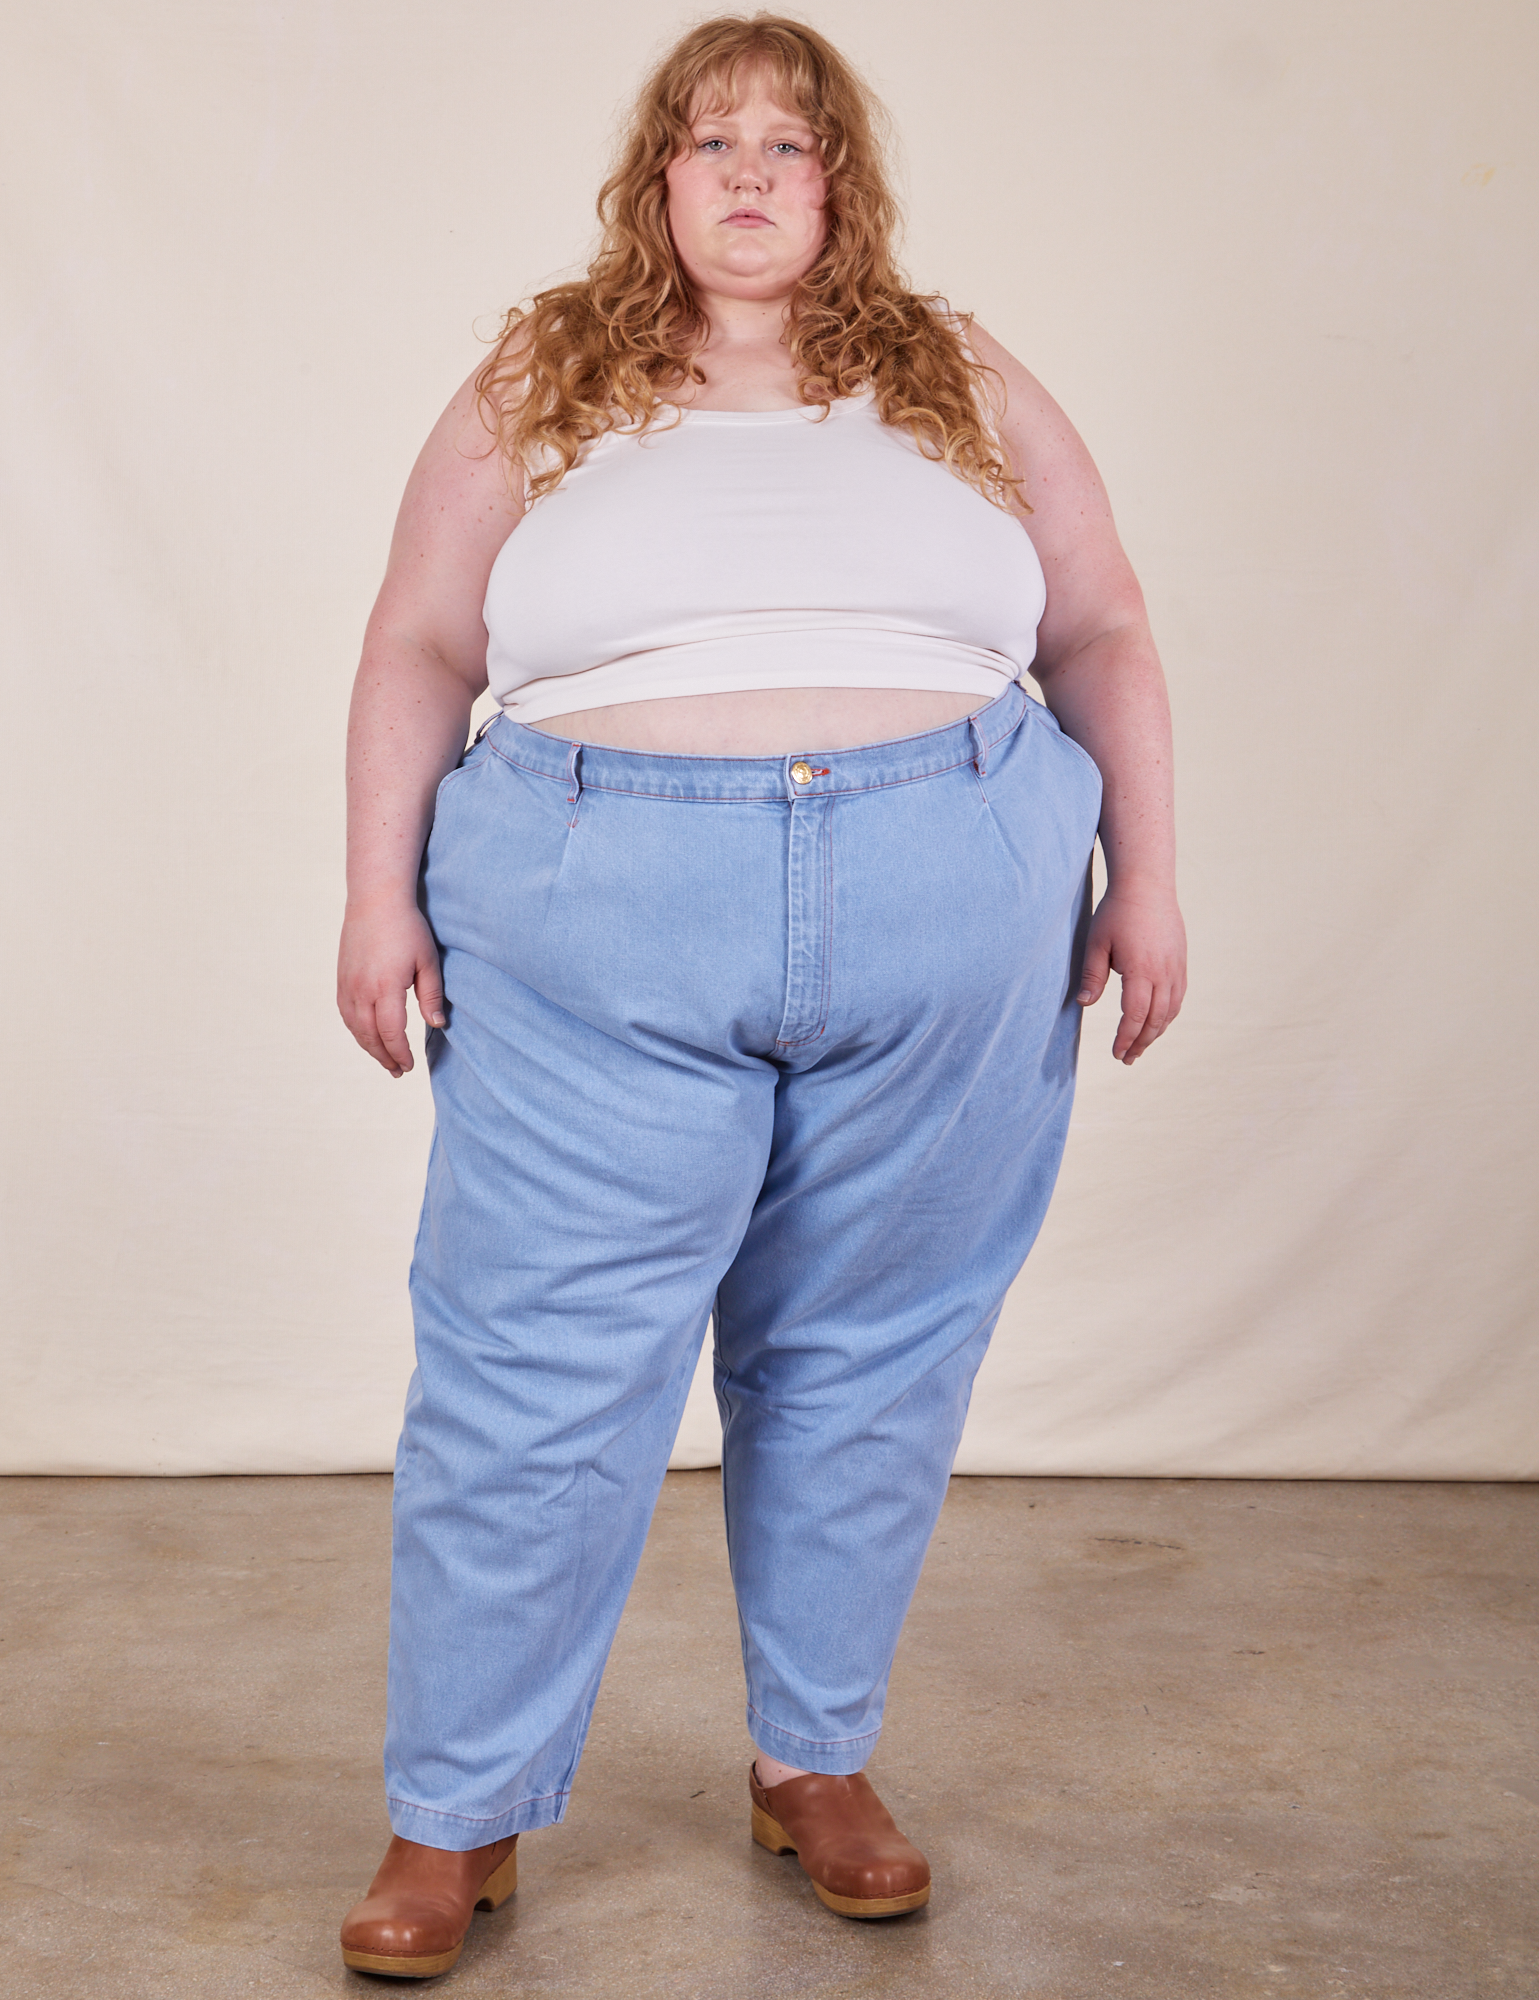 Catie is wearing Cropped Tank Top in Vintage Off-White and light wash Denim Trousers